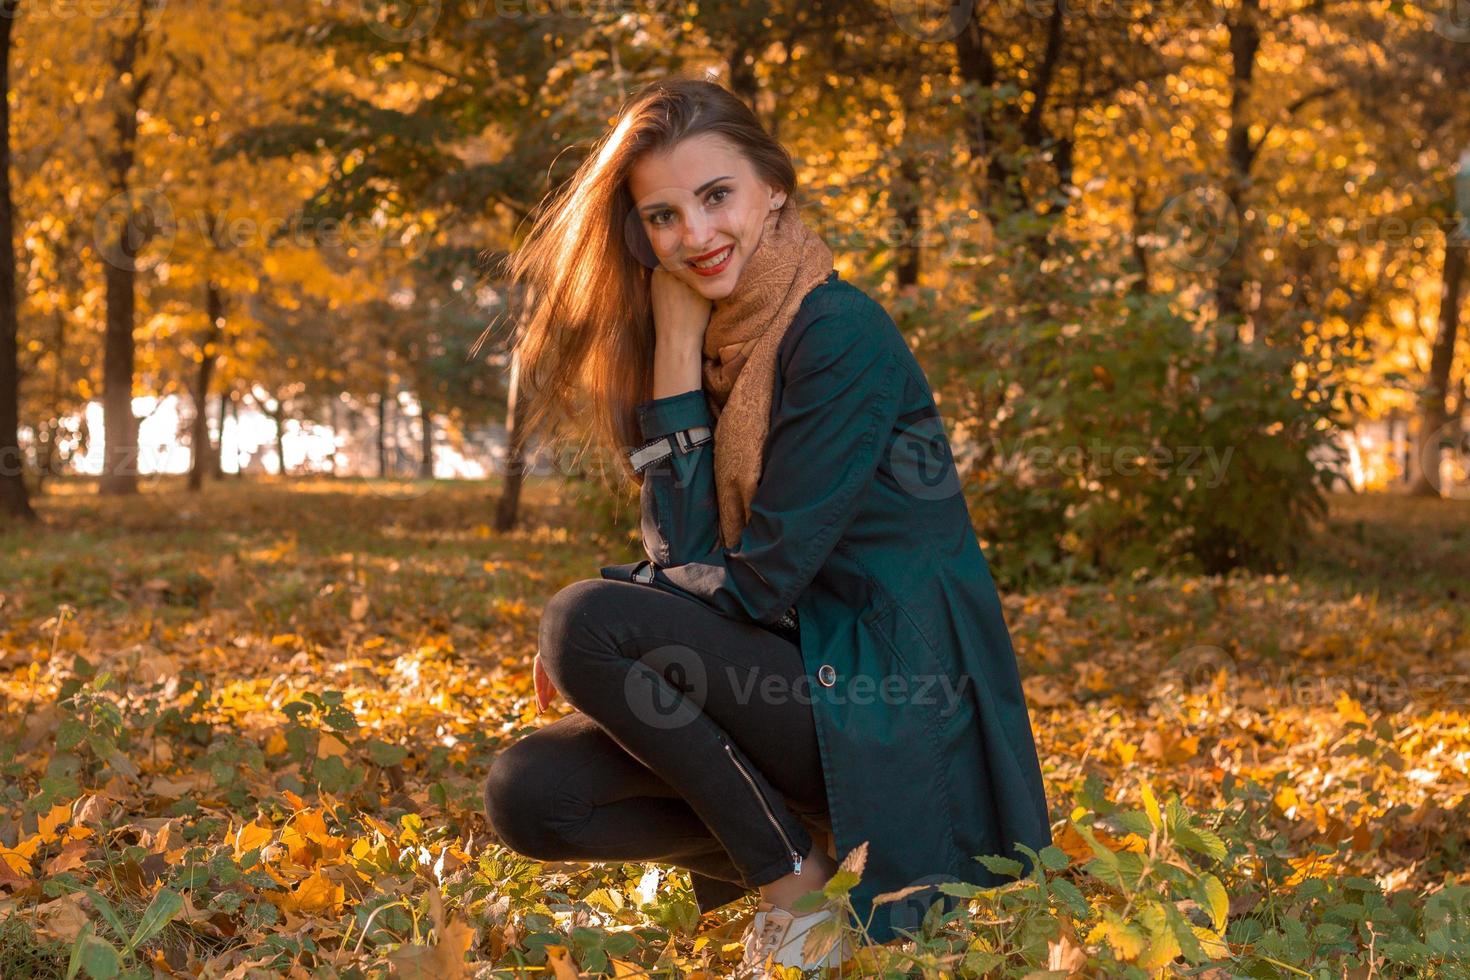 young cute girl in a black cloak sits in the Park in autumn on the lawn and smiles photo